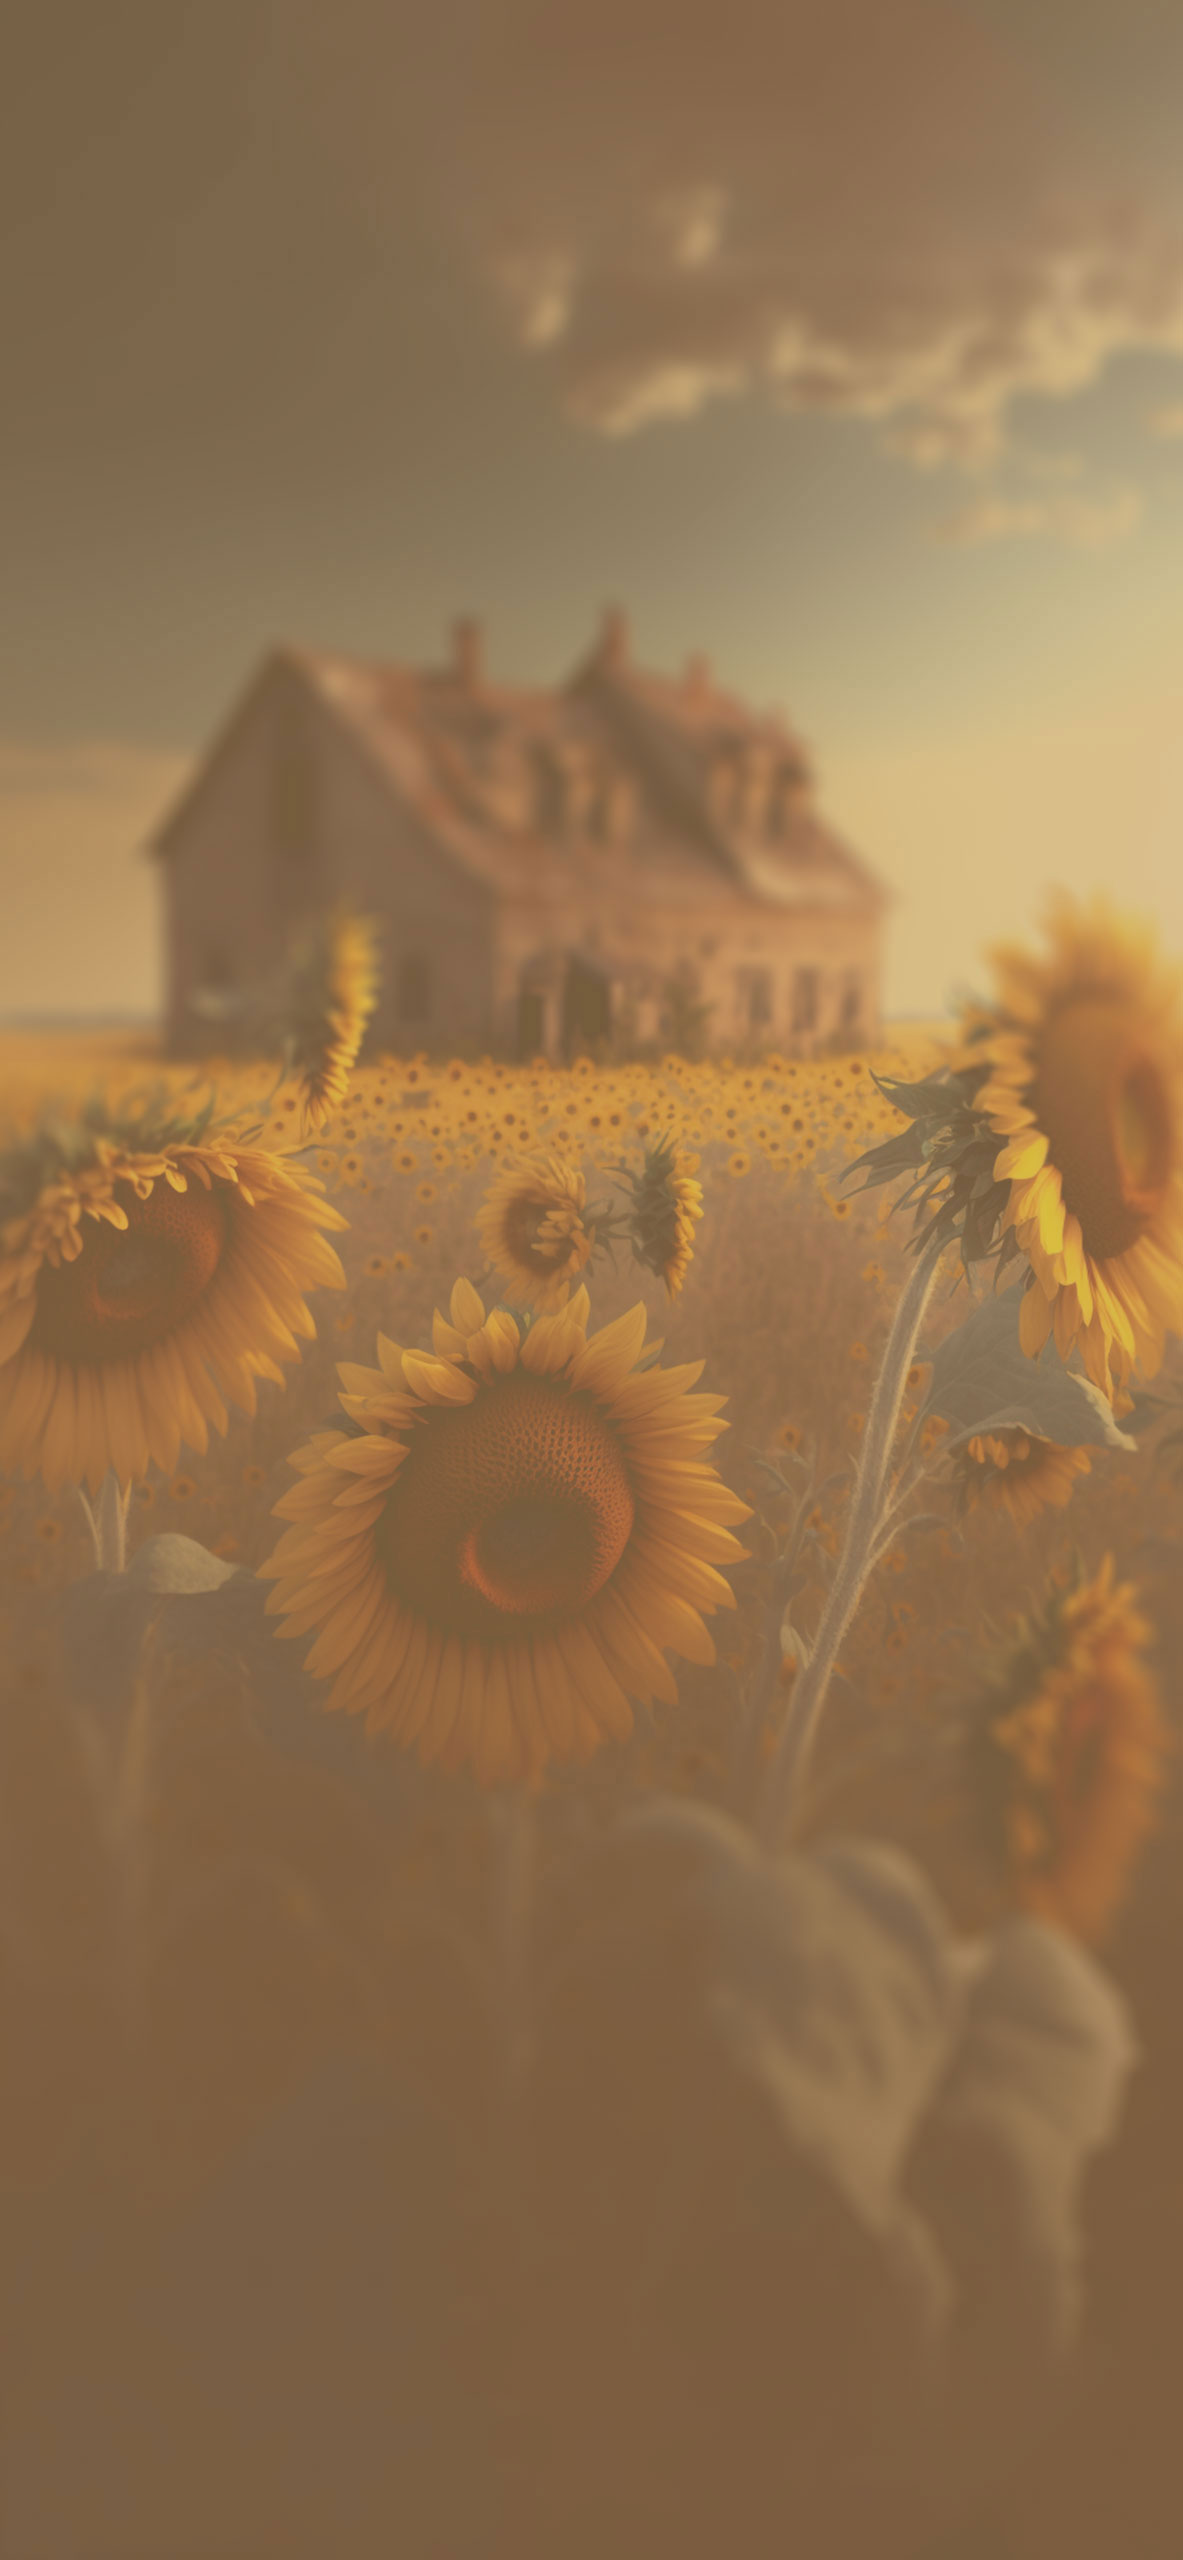 sunflowers old house background